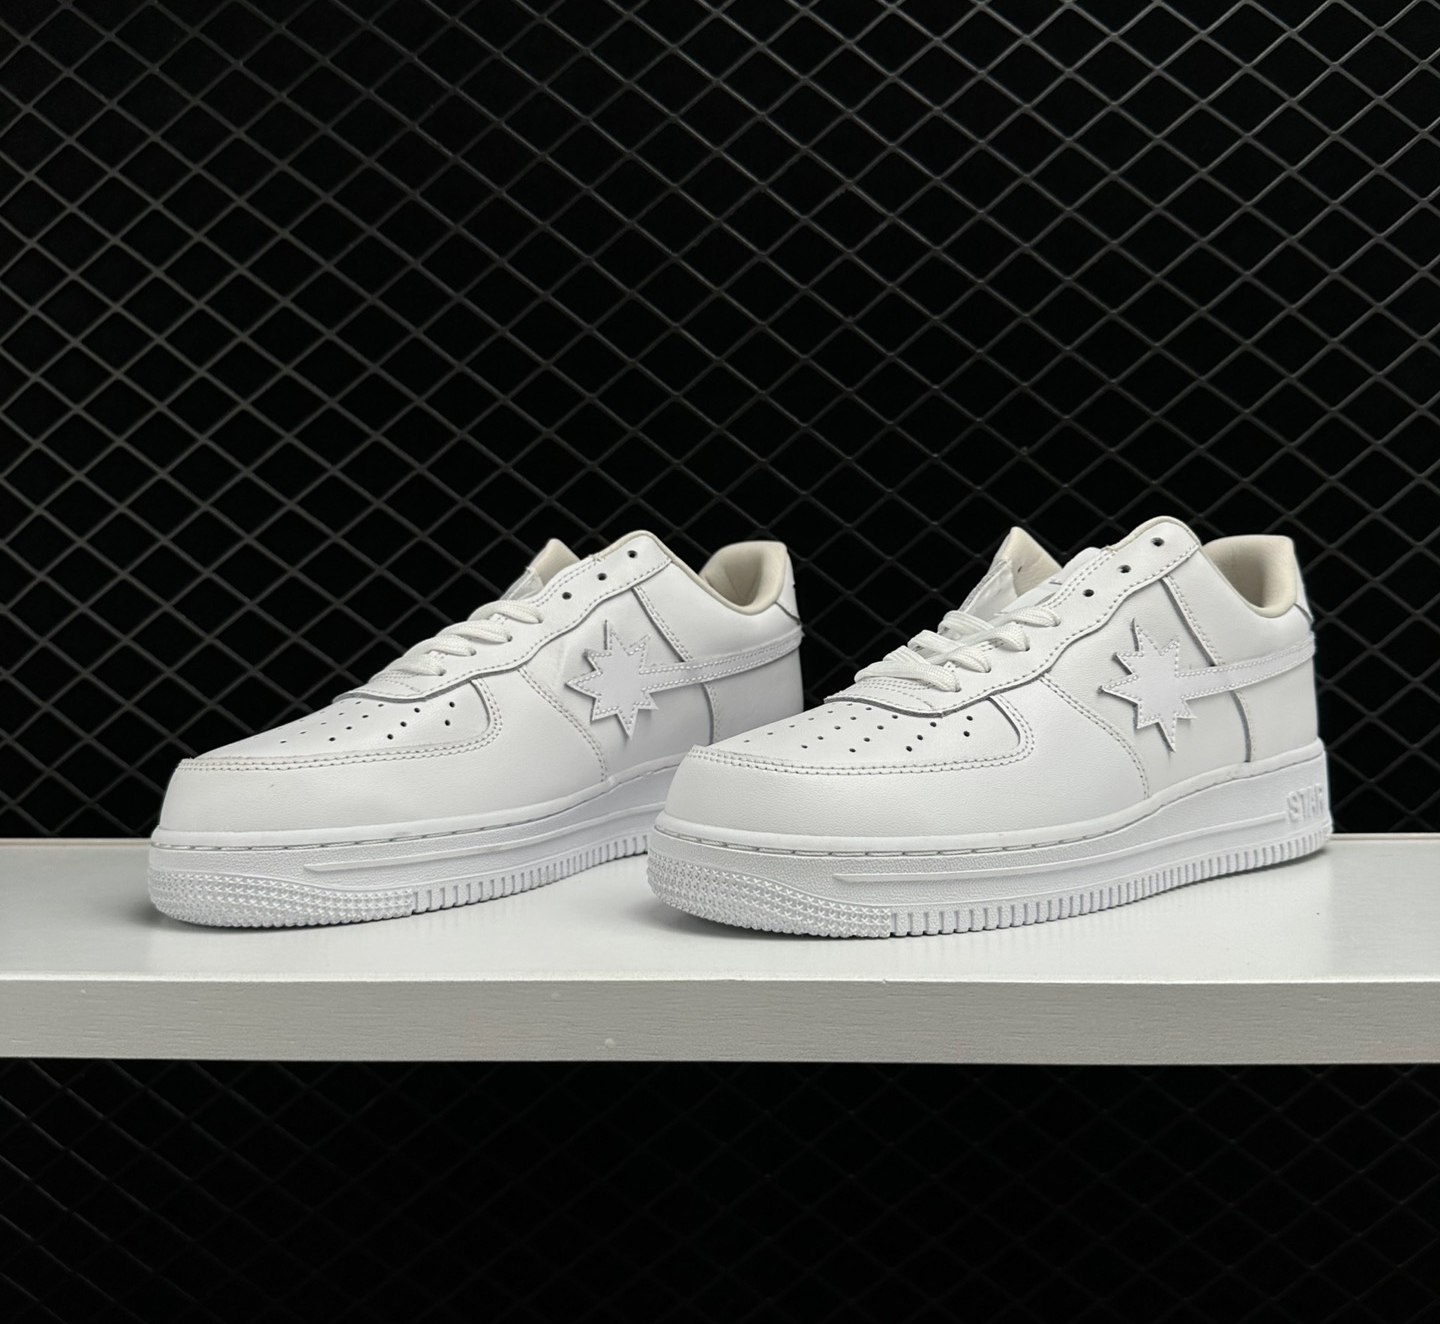 A Bathing Ape Bape Sta Low M2 White Leather G80191007-WHT: Stylish and High-Quality Sneakers